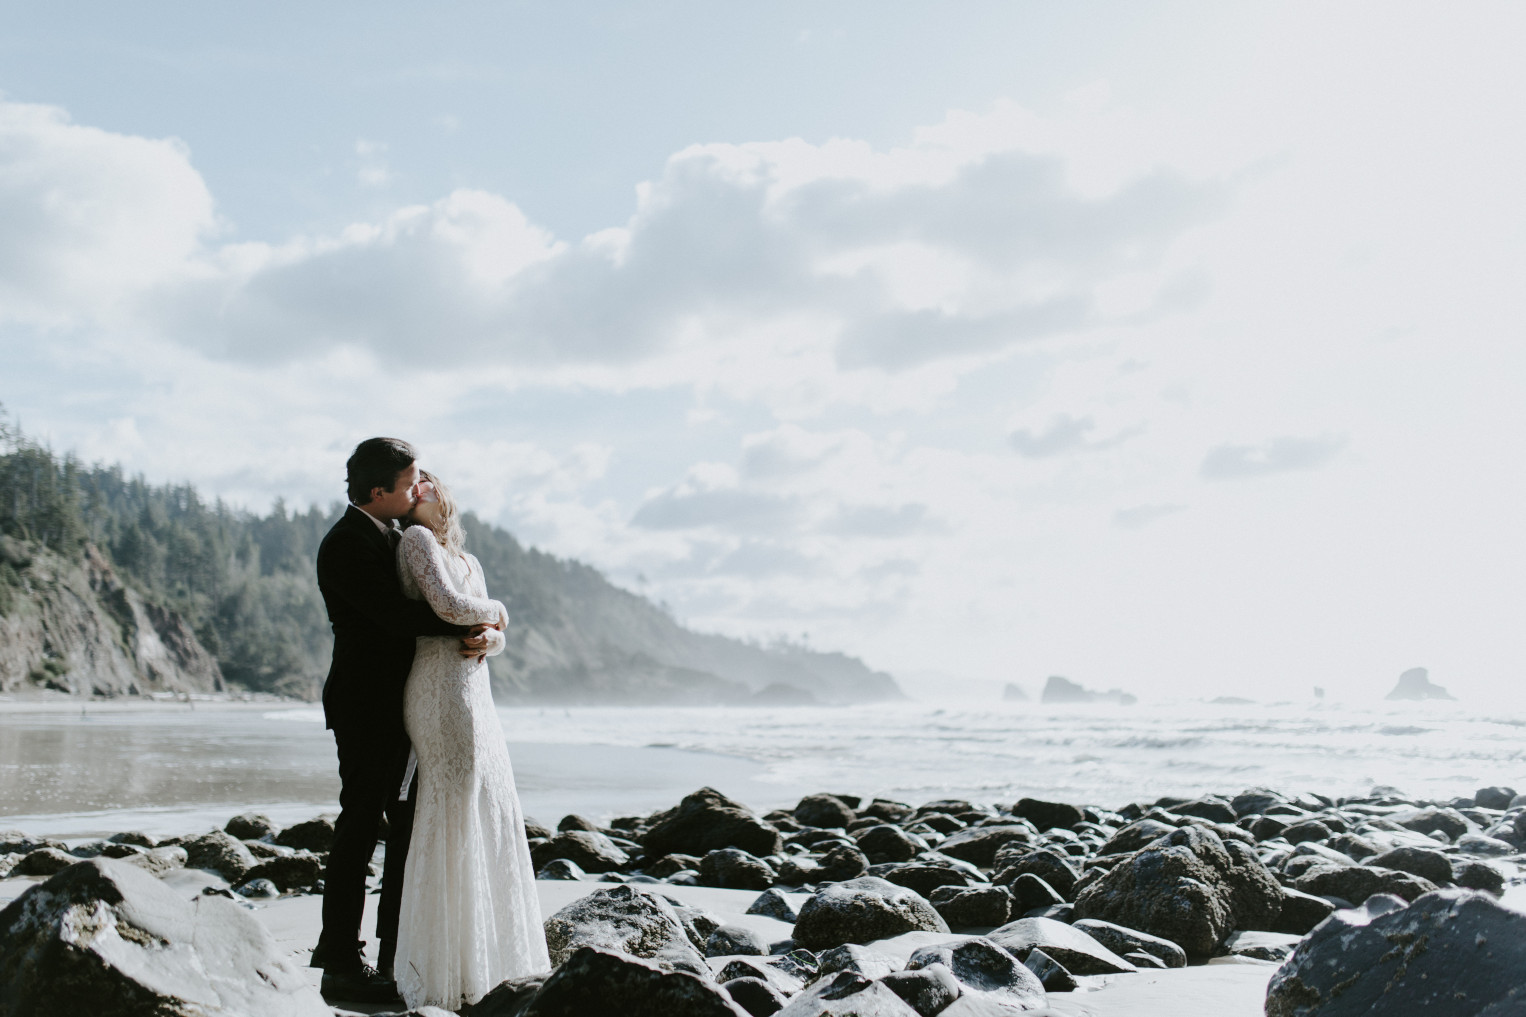 Nicole and Vlad kiss while staning near the ocean. Elopement wedding photography at Cannon Beach by Sienna Plus Josh.